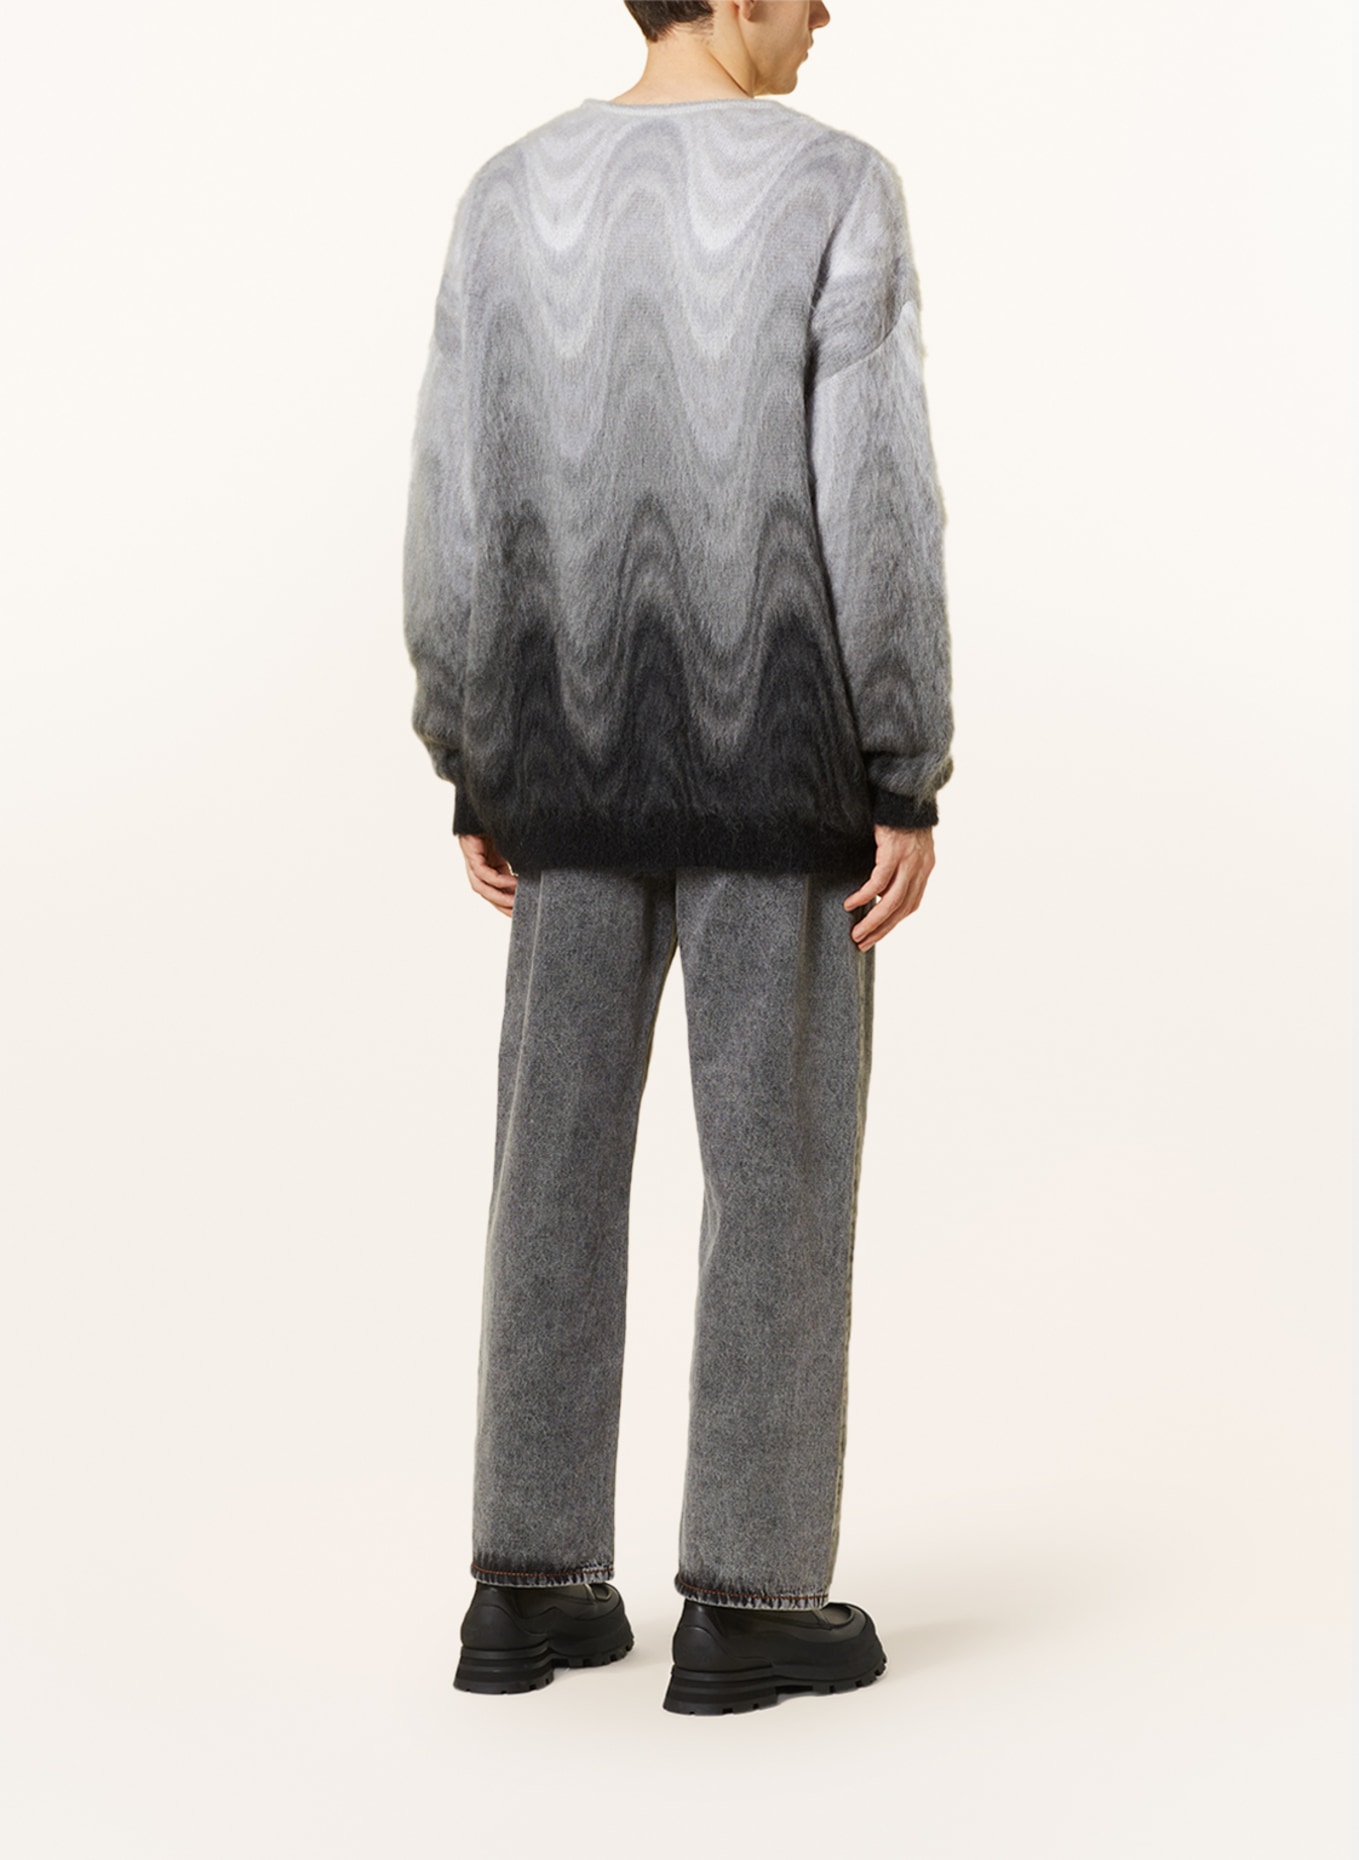 ETRO Sweater with mohair, Color: BLACK/ WHITE/ GRAY (Image 3)